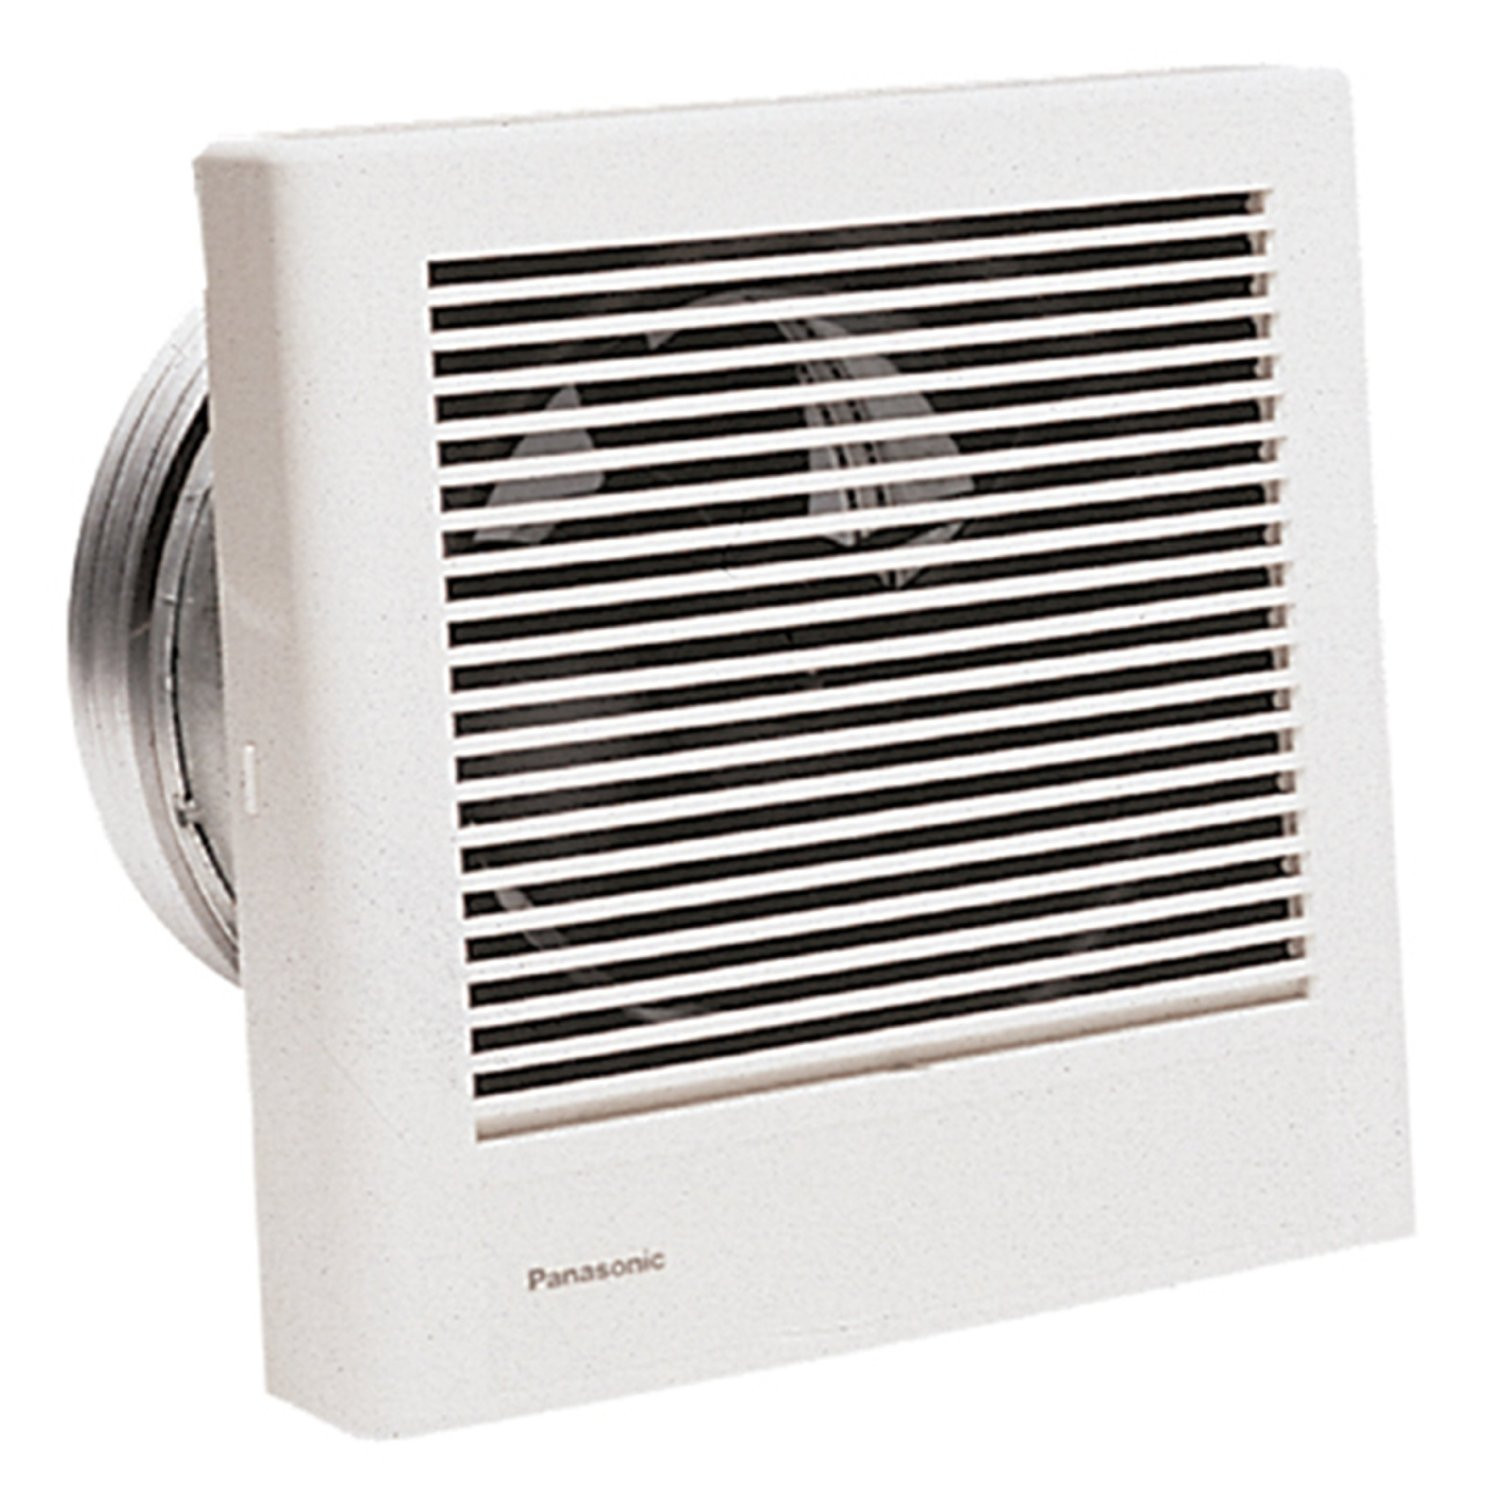 Wall Mount Bathroom Exhaust Fan
 Interior Magnificent Fresh Design Wall Mounted Fans For